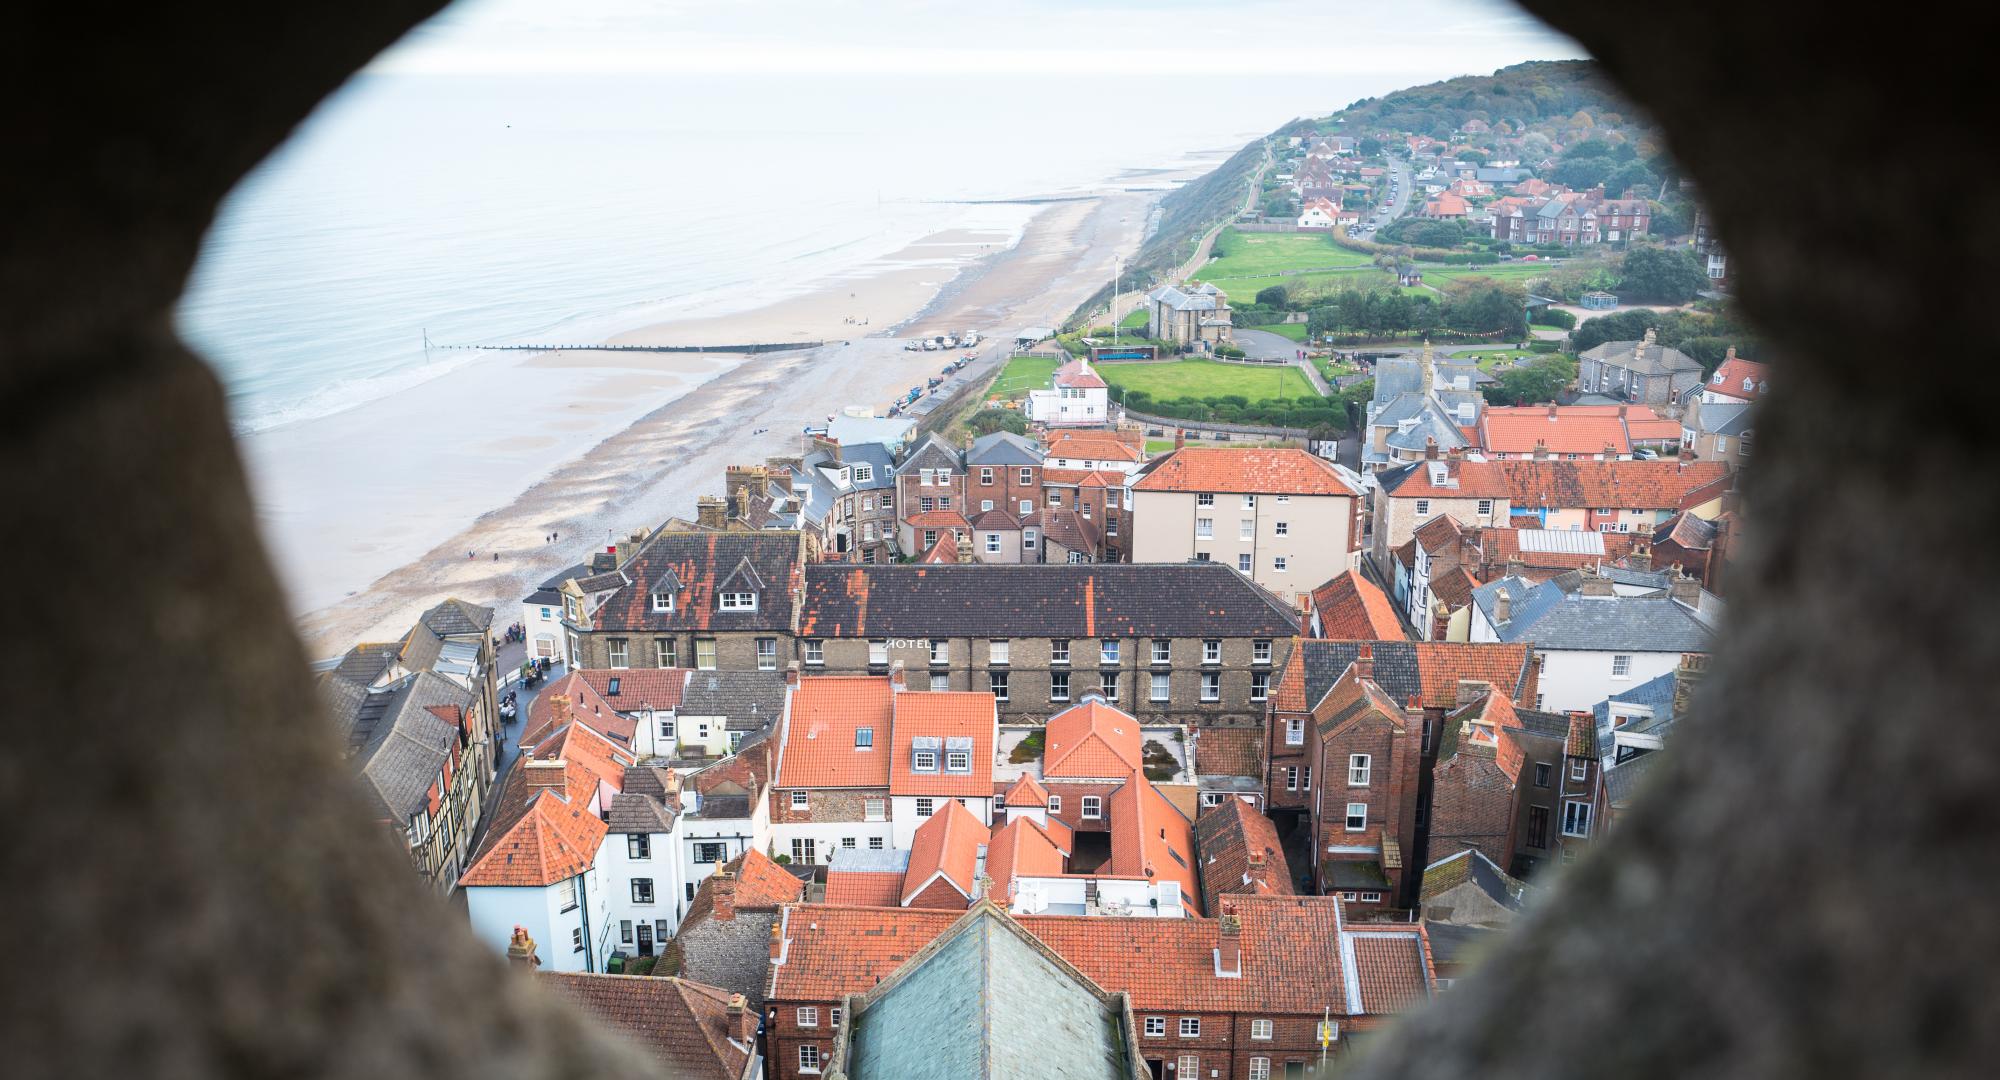 Aerial view of a town in North Norfolk through a stone window